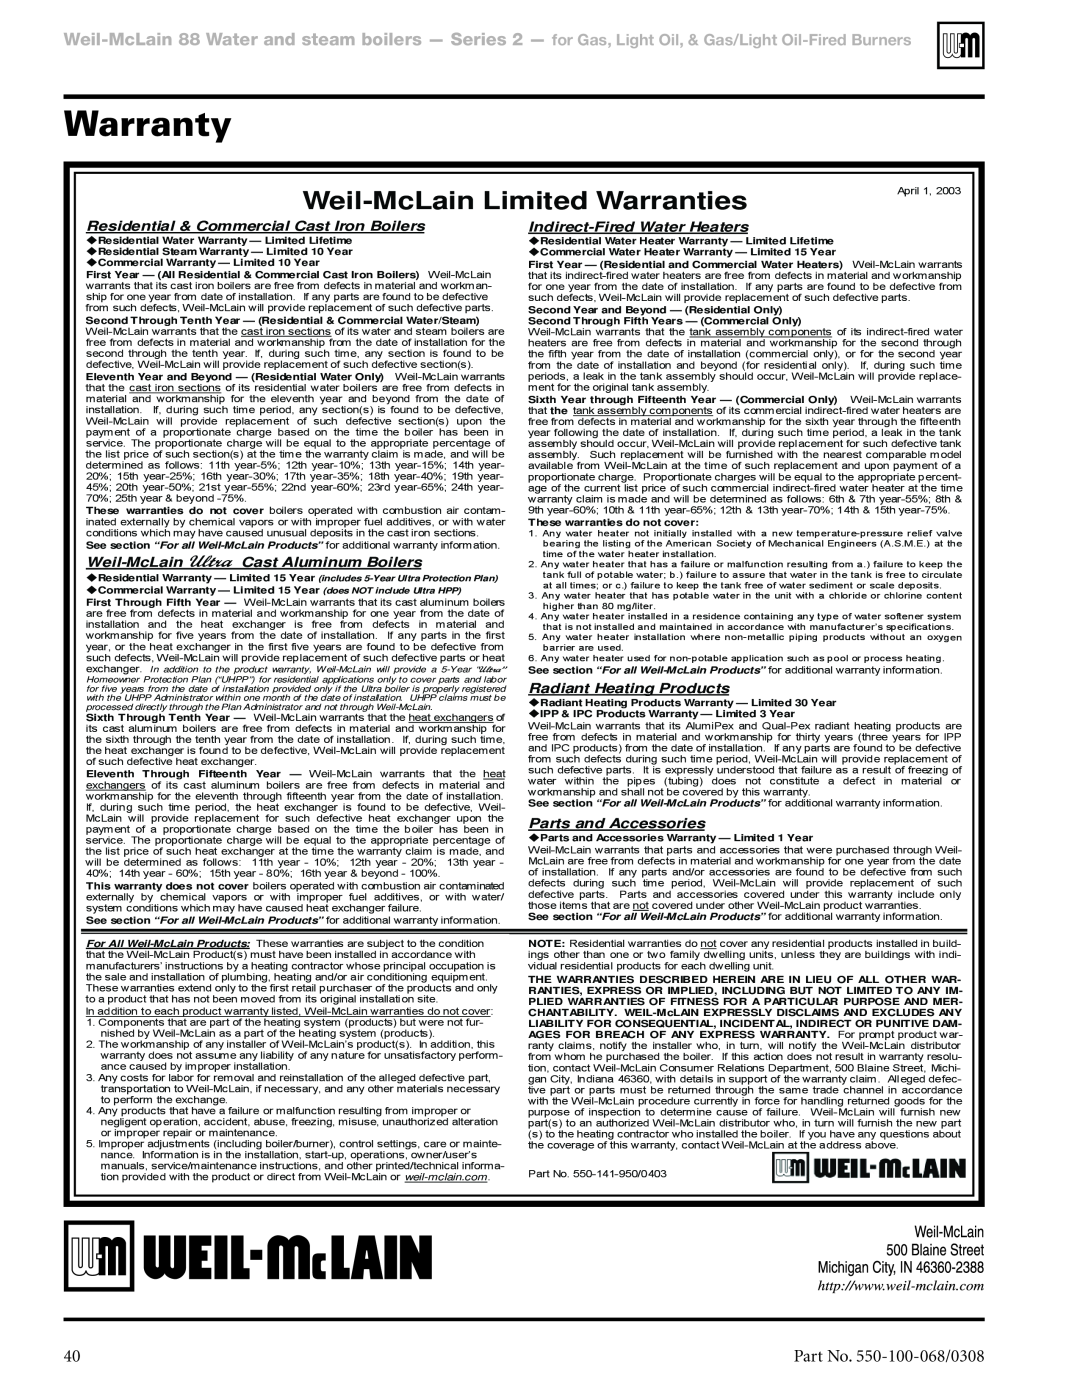 Weil-McLain 88 Warranty, Weil-McLainLimited Warranties, Residential & Commercial Cast Iron Boilers, Parts and Accessories 